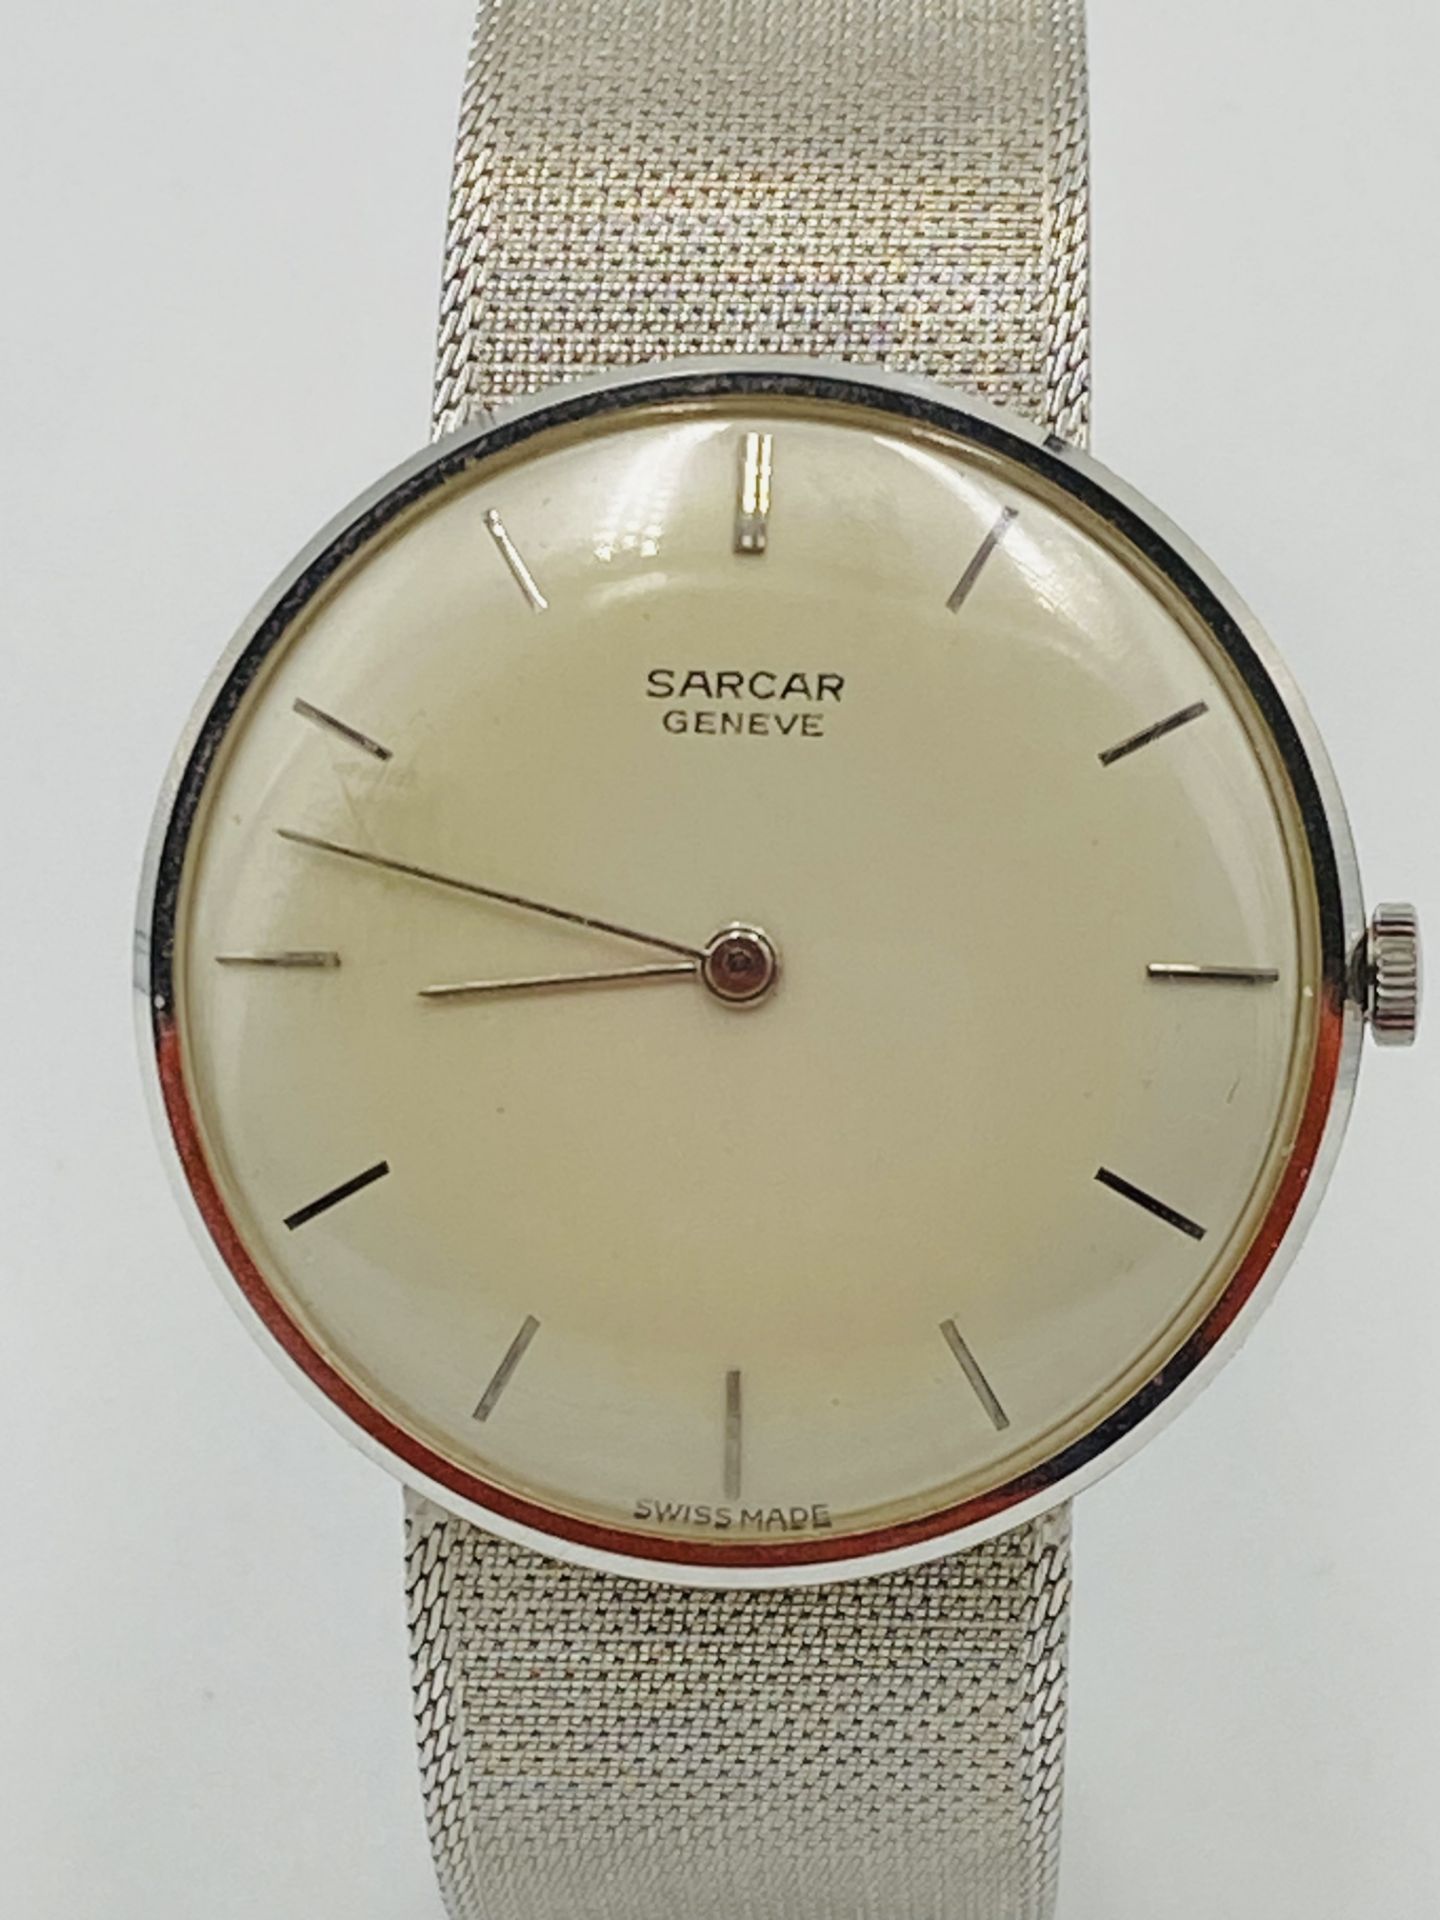 Sarcar Geneve wristwatch with 18ct gold strap